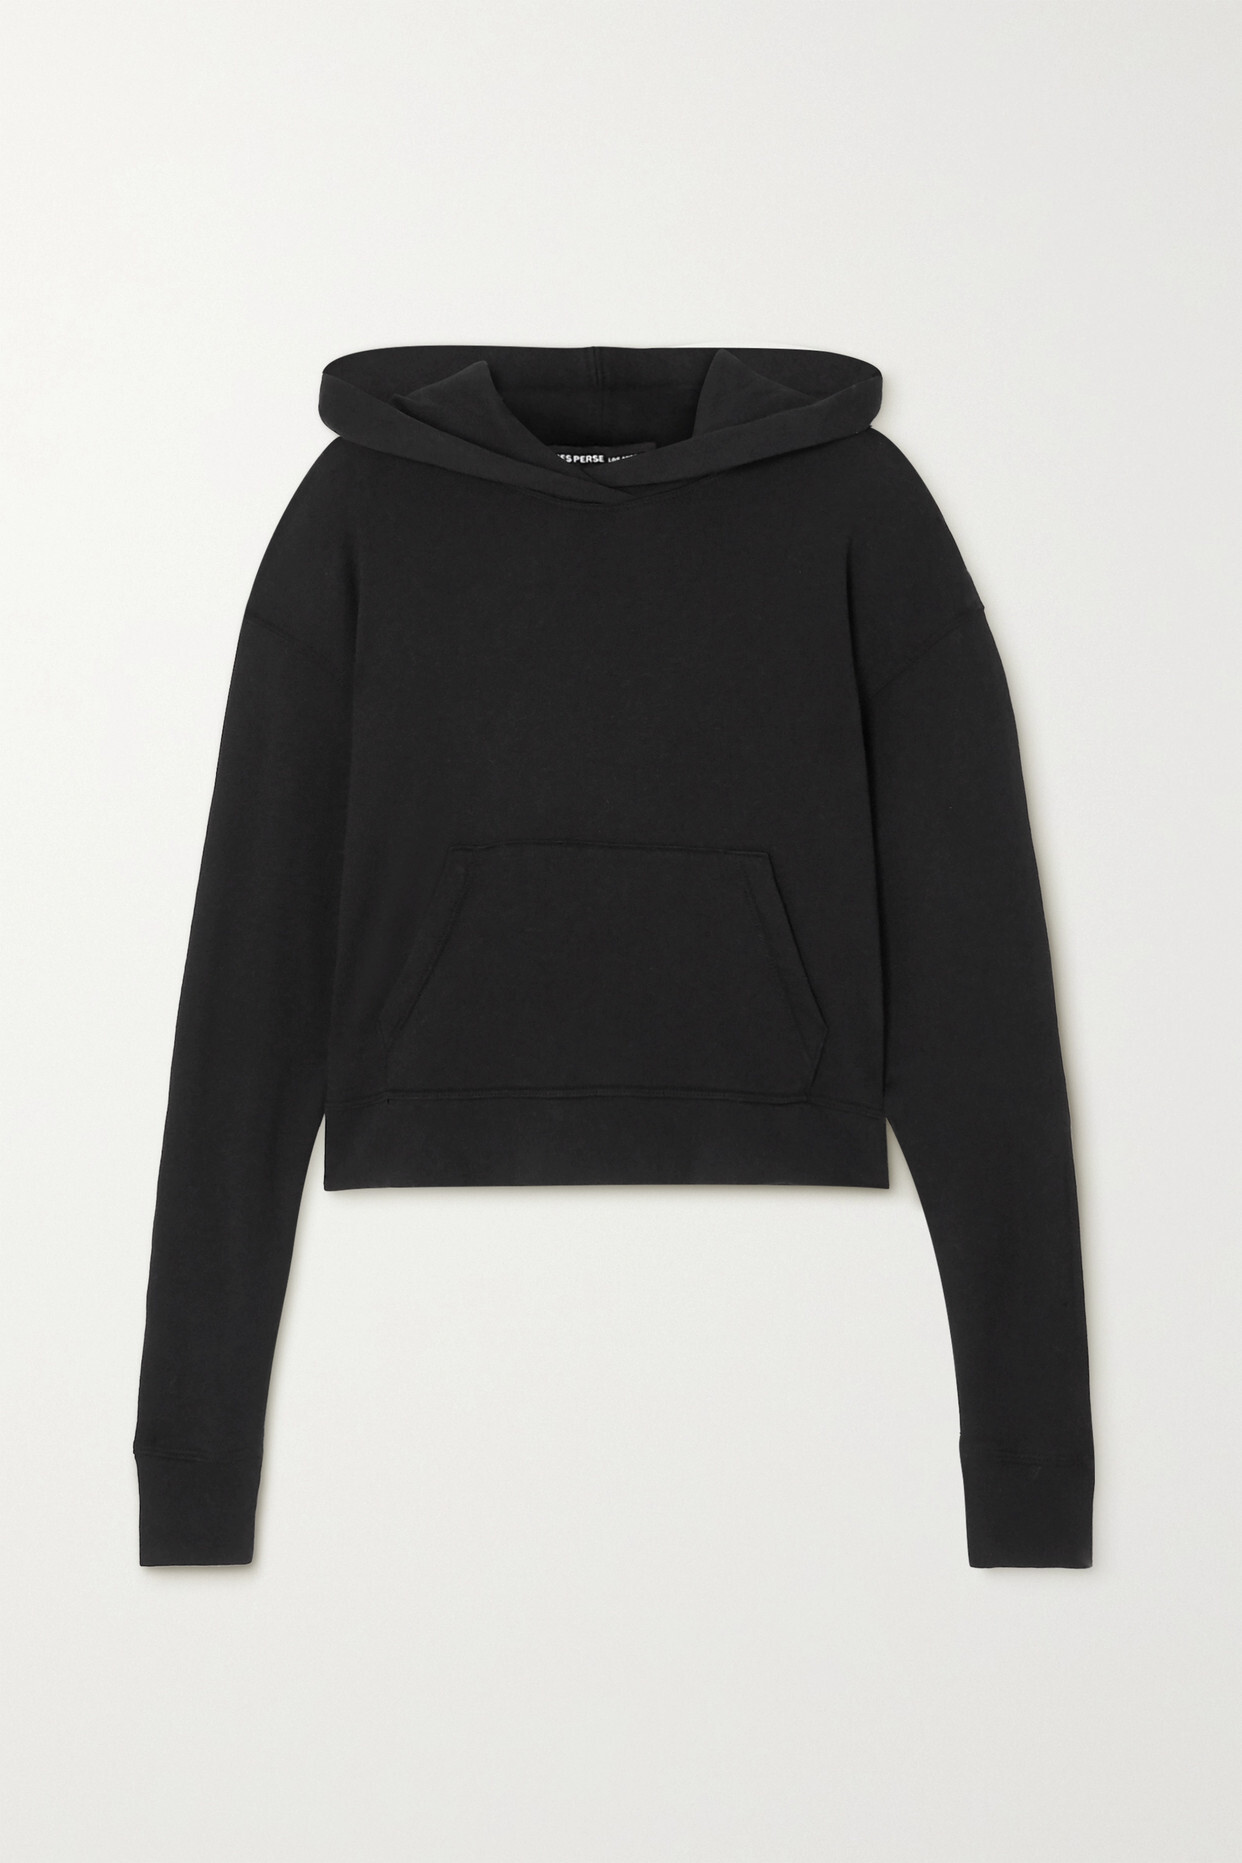 James Perse - Cropped Cotton-jersey Hoodie - Black